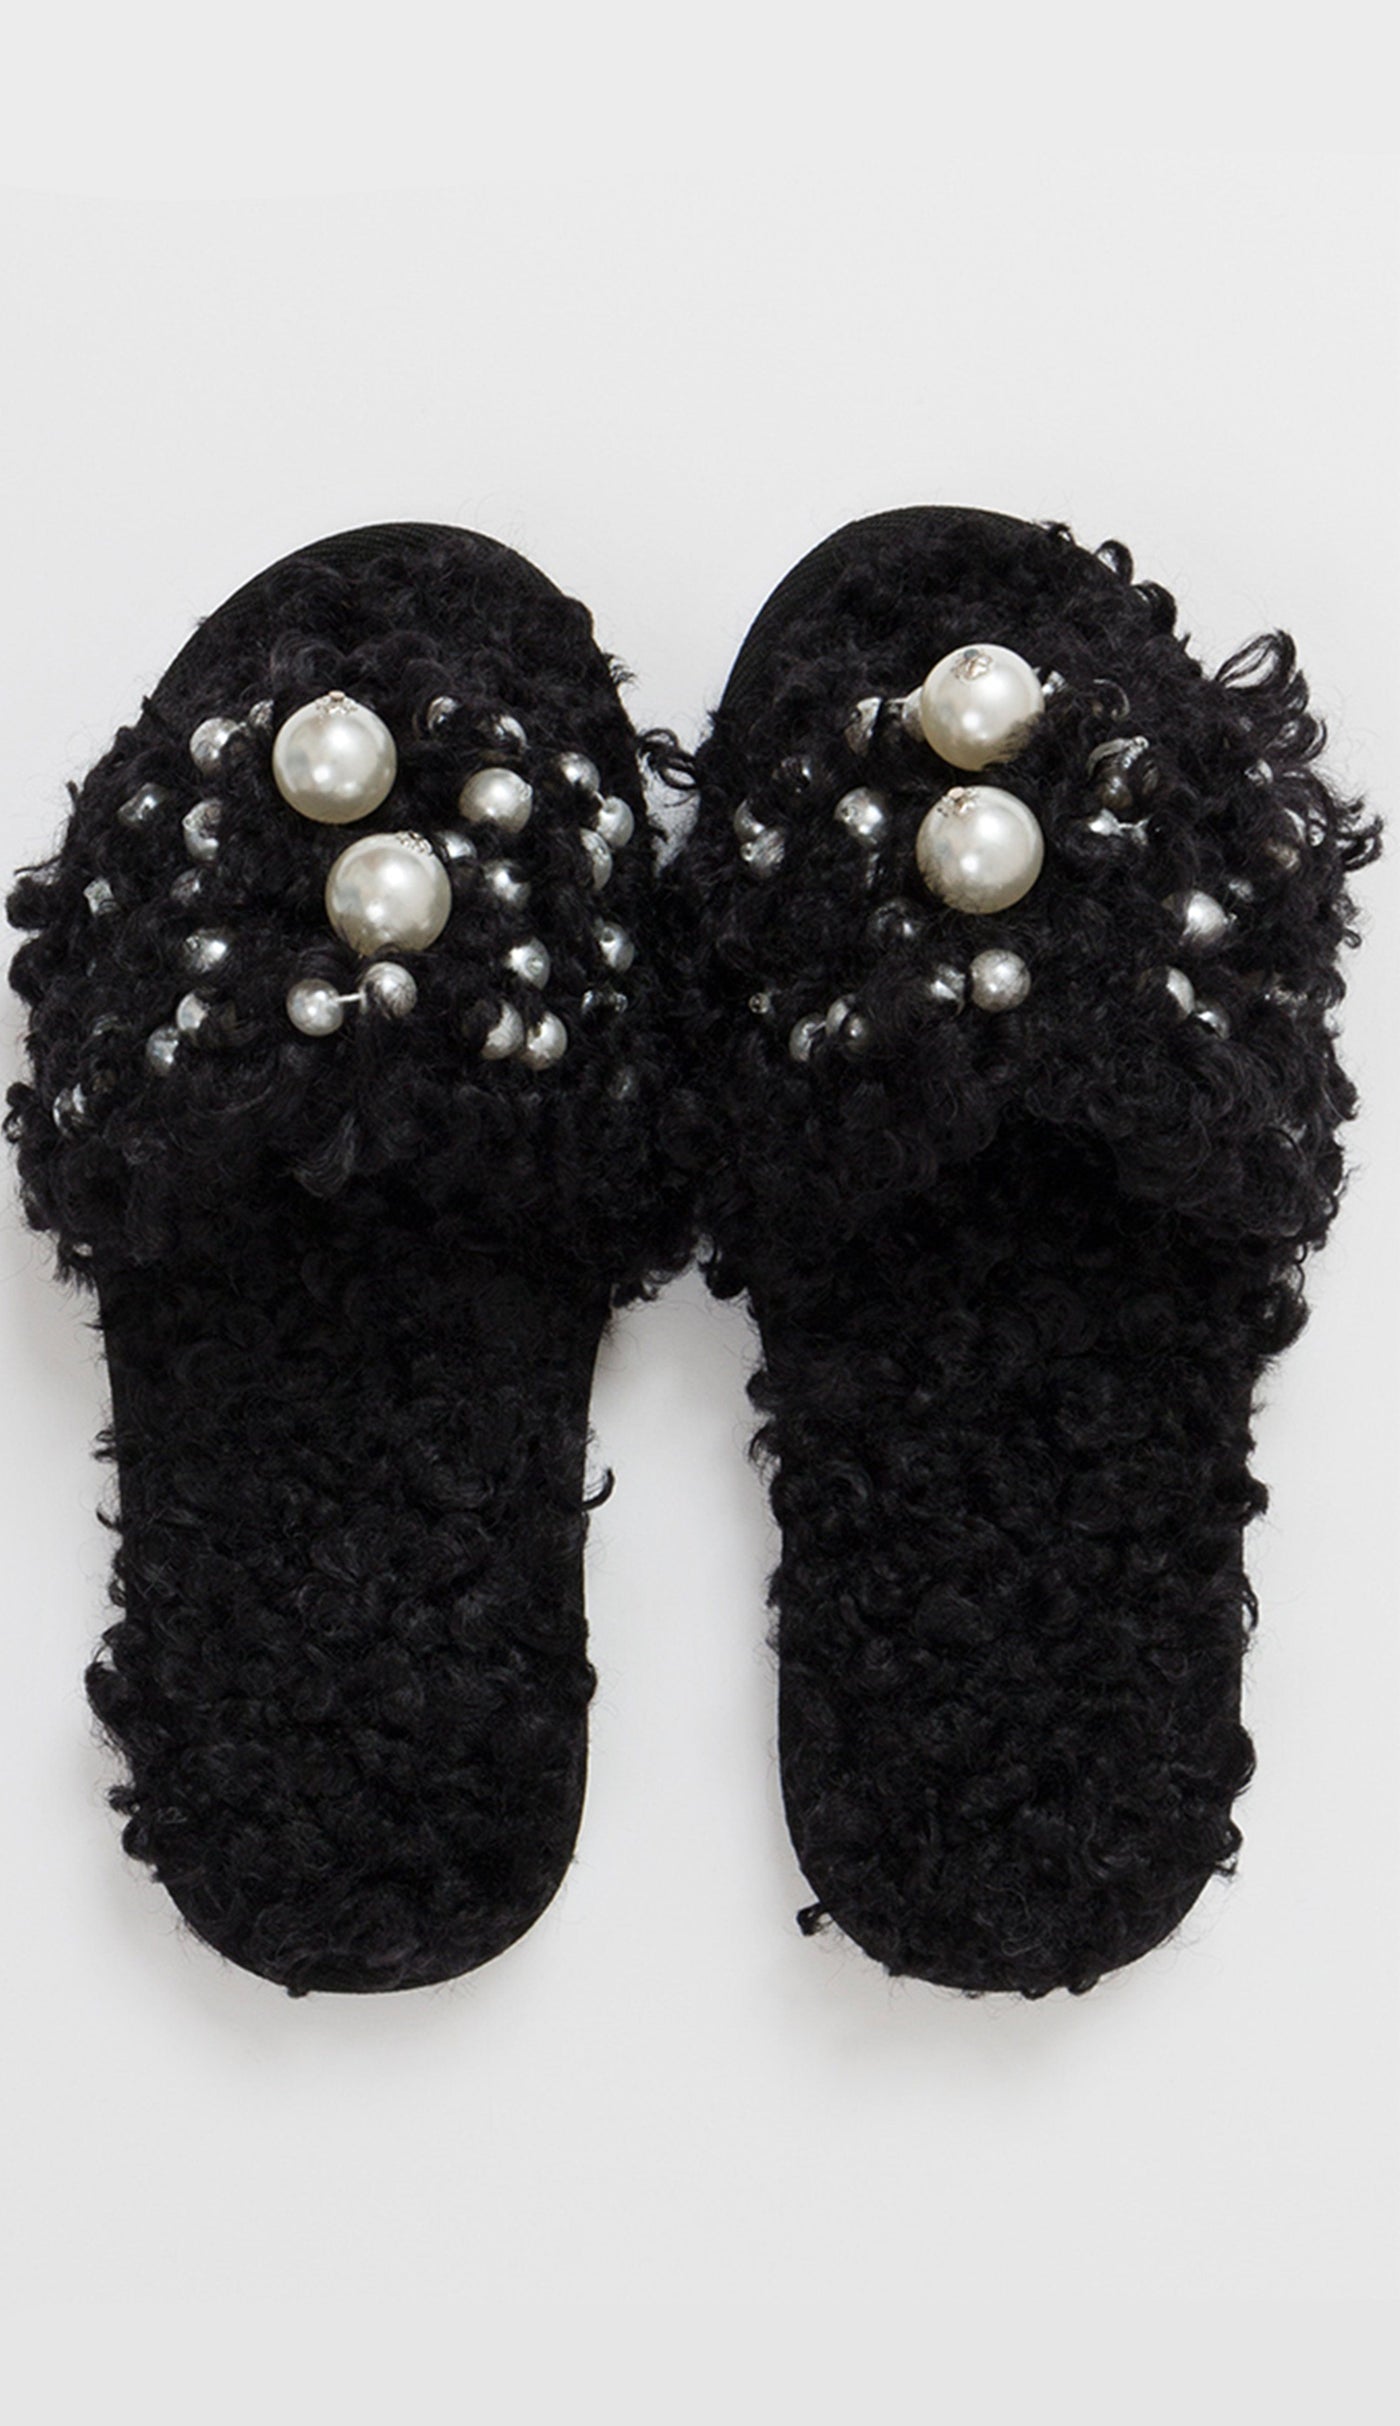 Maisie slipper with pearls in black front view pia rossini